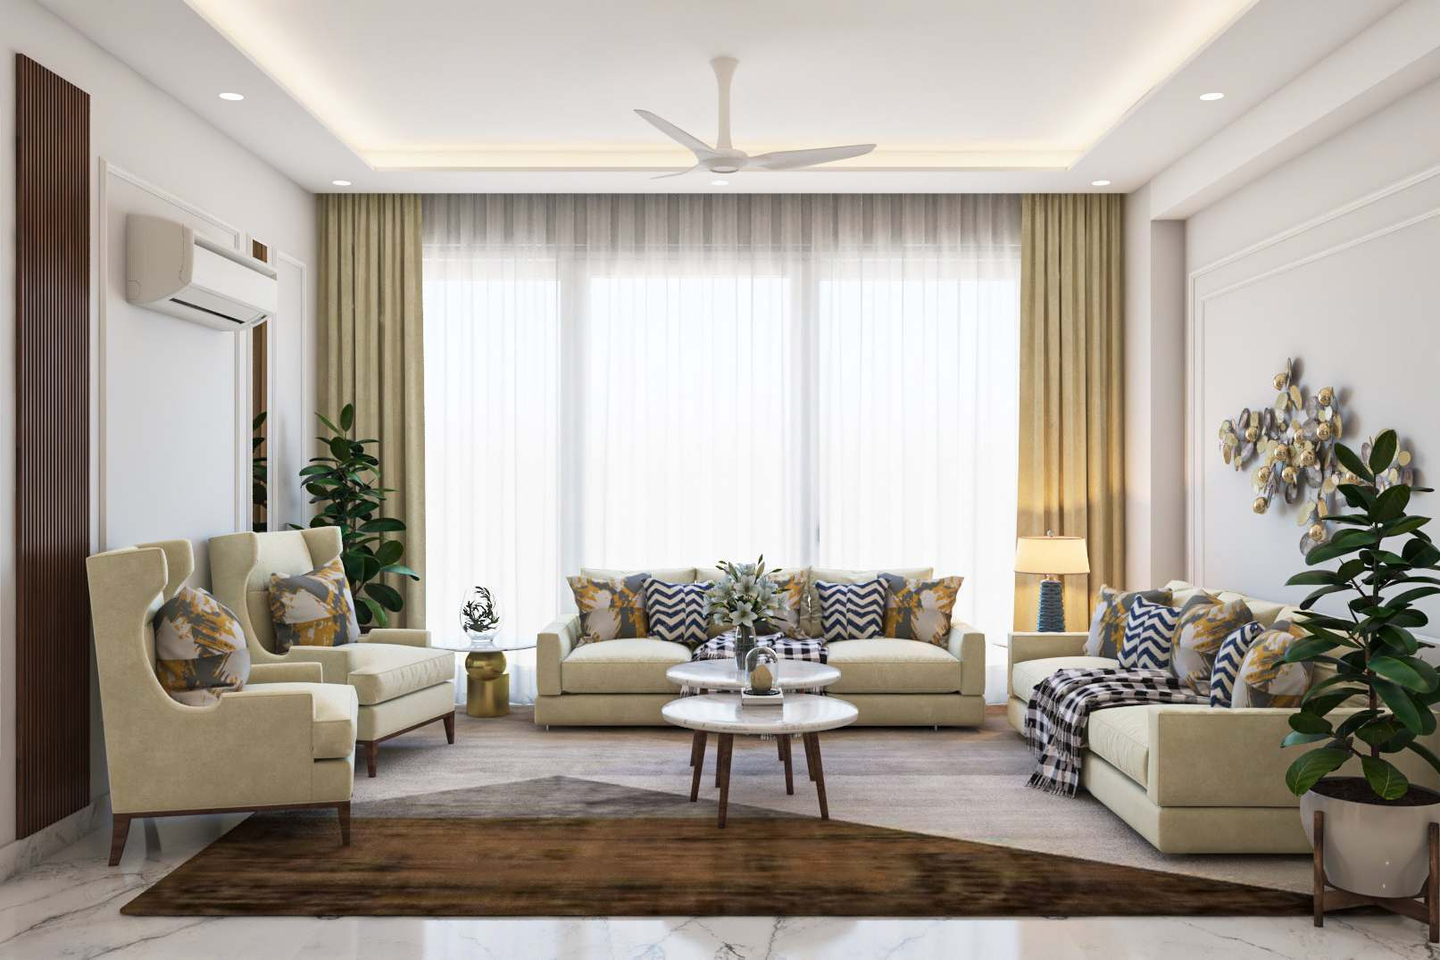 Contemporary Living Room Design with Multiple Beige Seaters - Livspace